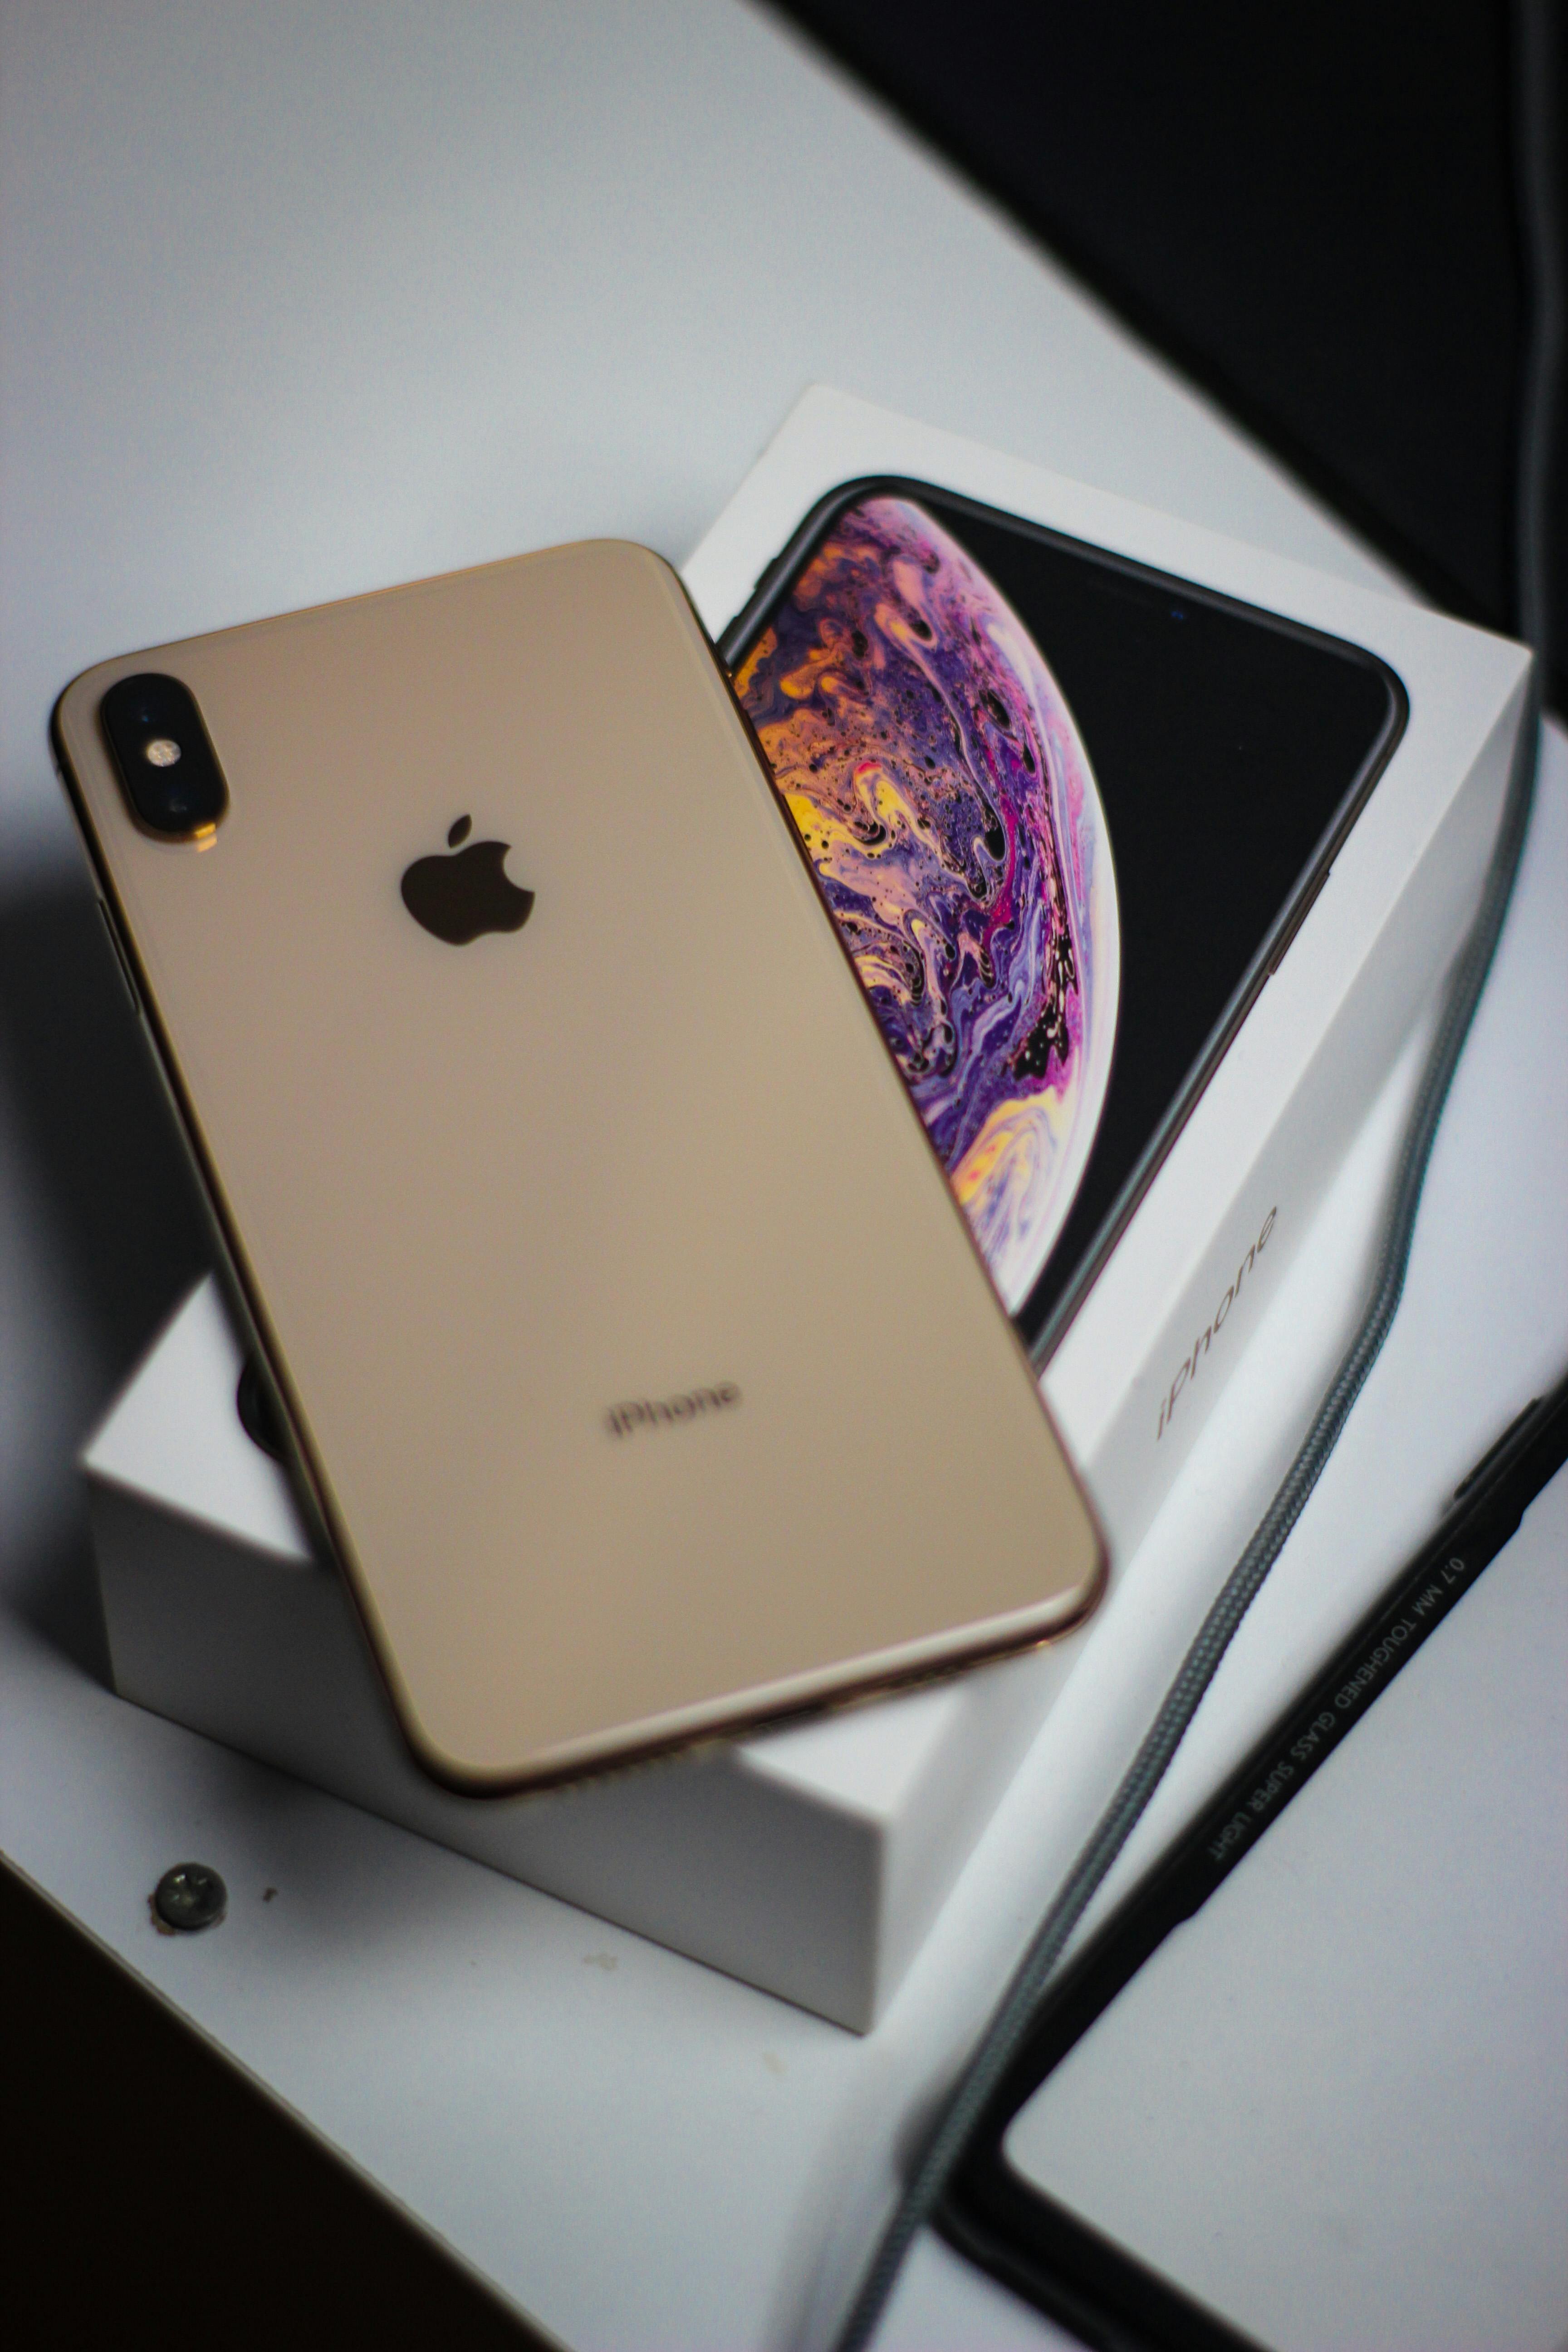 Iphone Xs Max Price in Nepal, Tech Stalking